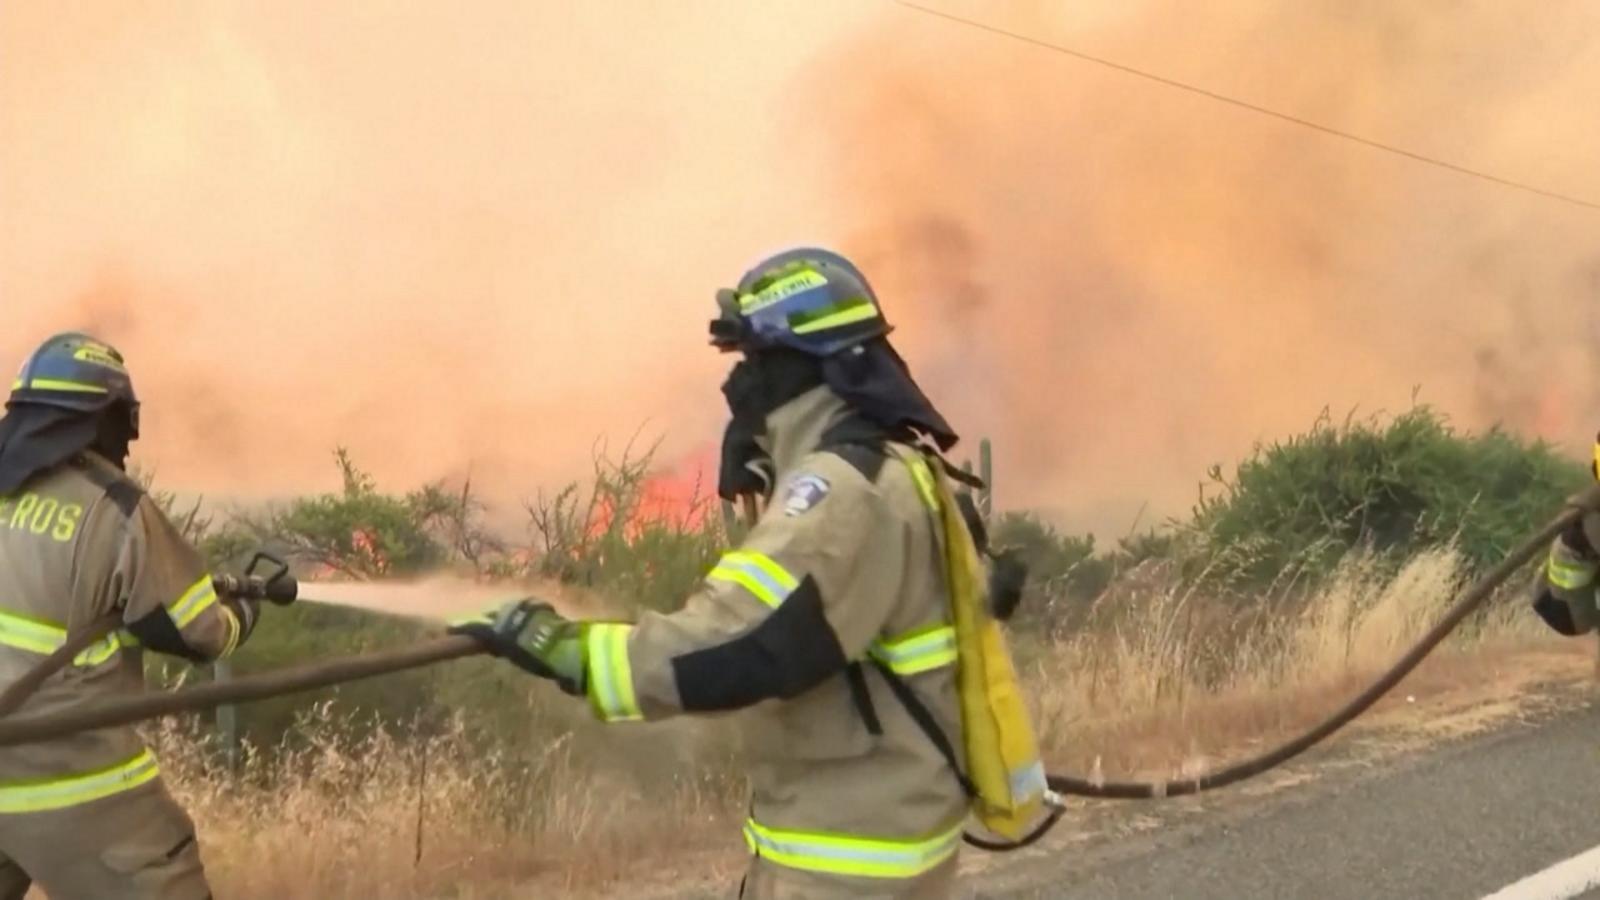 VIDEO: Chile declares state of emergency from wildfires